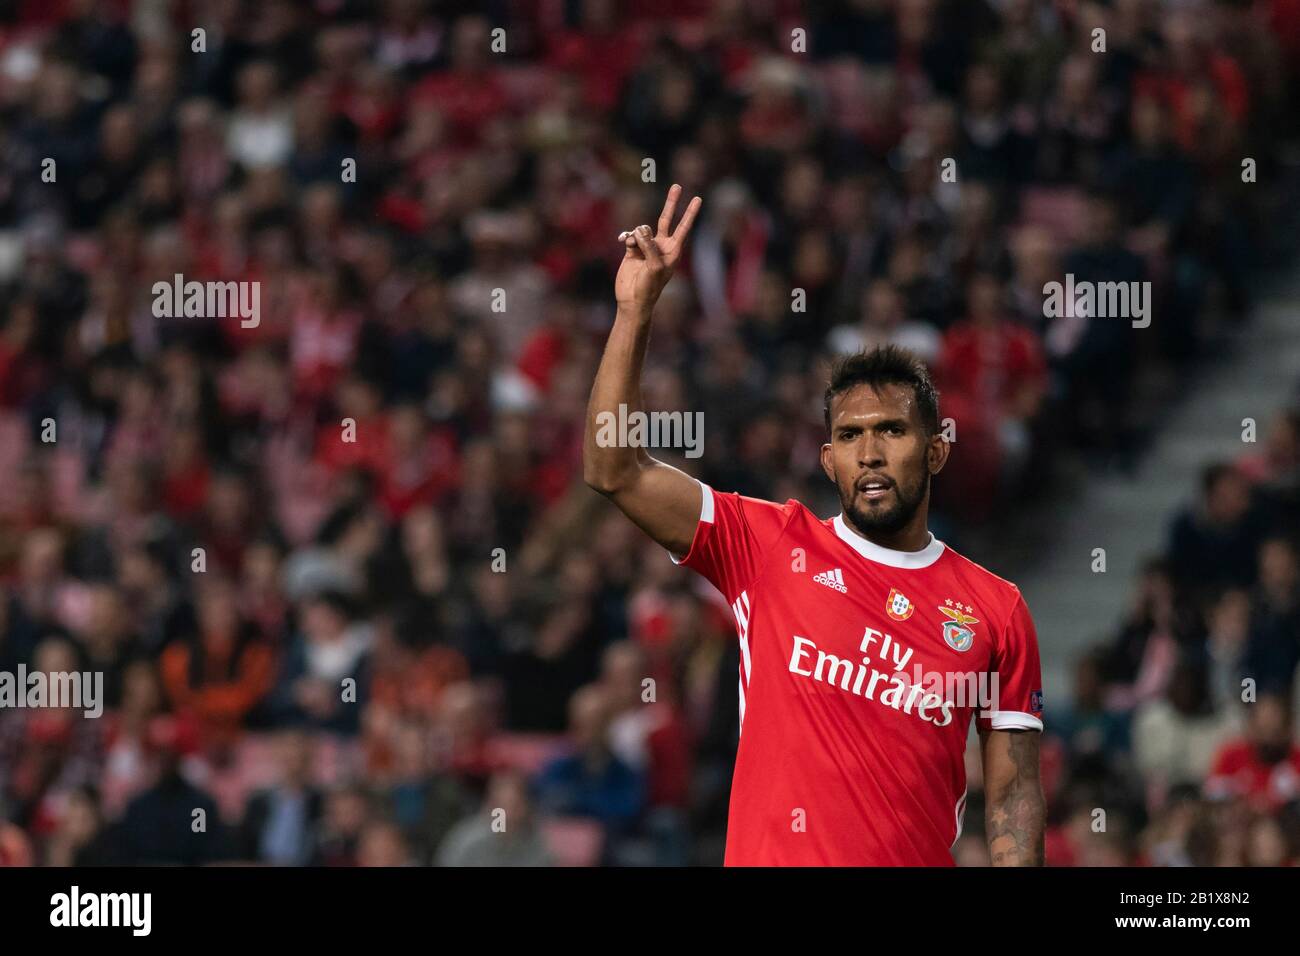 Lisbon, Portugal. 27th Feb, 2020. Dyego Sousa of SL Benfica seen in action during the UEFA Europa League Match 2019/20 between SL Benfica and FC Shakhtar Donetskt at Estádio da Luz in Lisbon.(Final score: SL Benfica 3:3 FC Shakhtar Donetskt) Credit: SOPA Images Limited/Alamy Live News Stock Photo